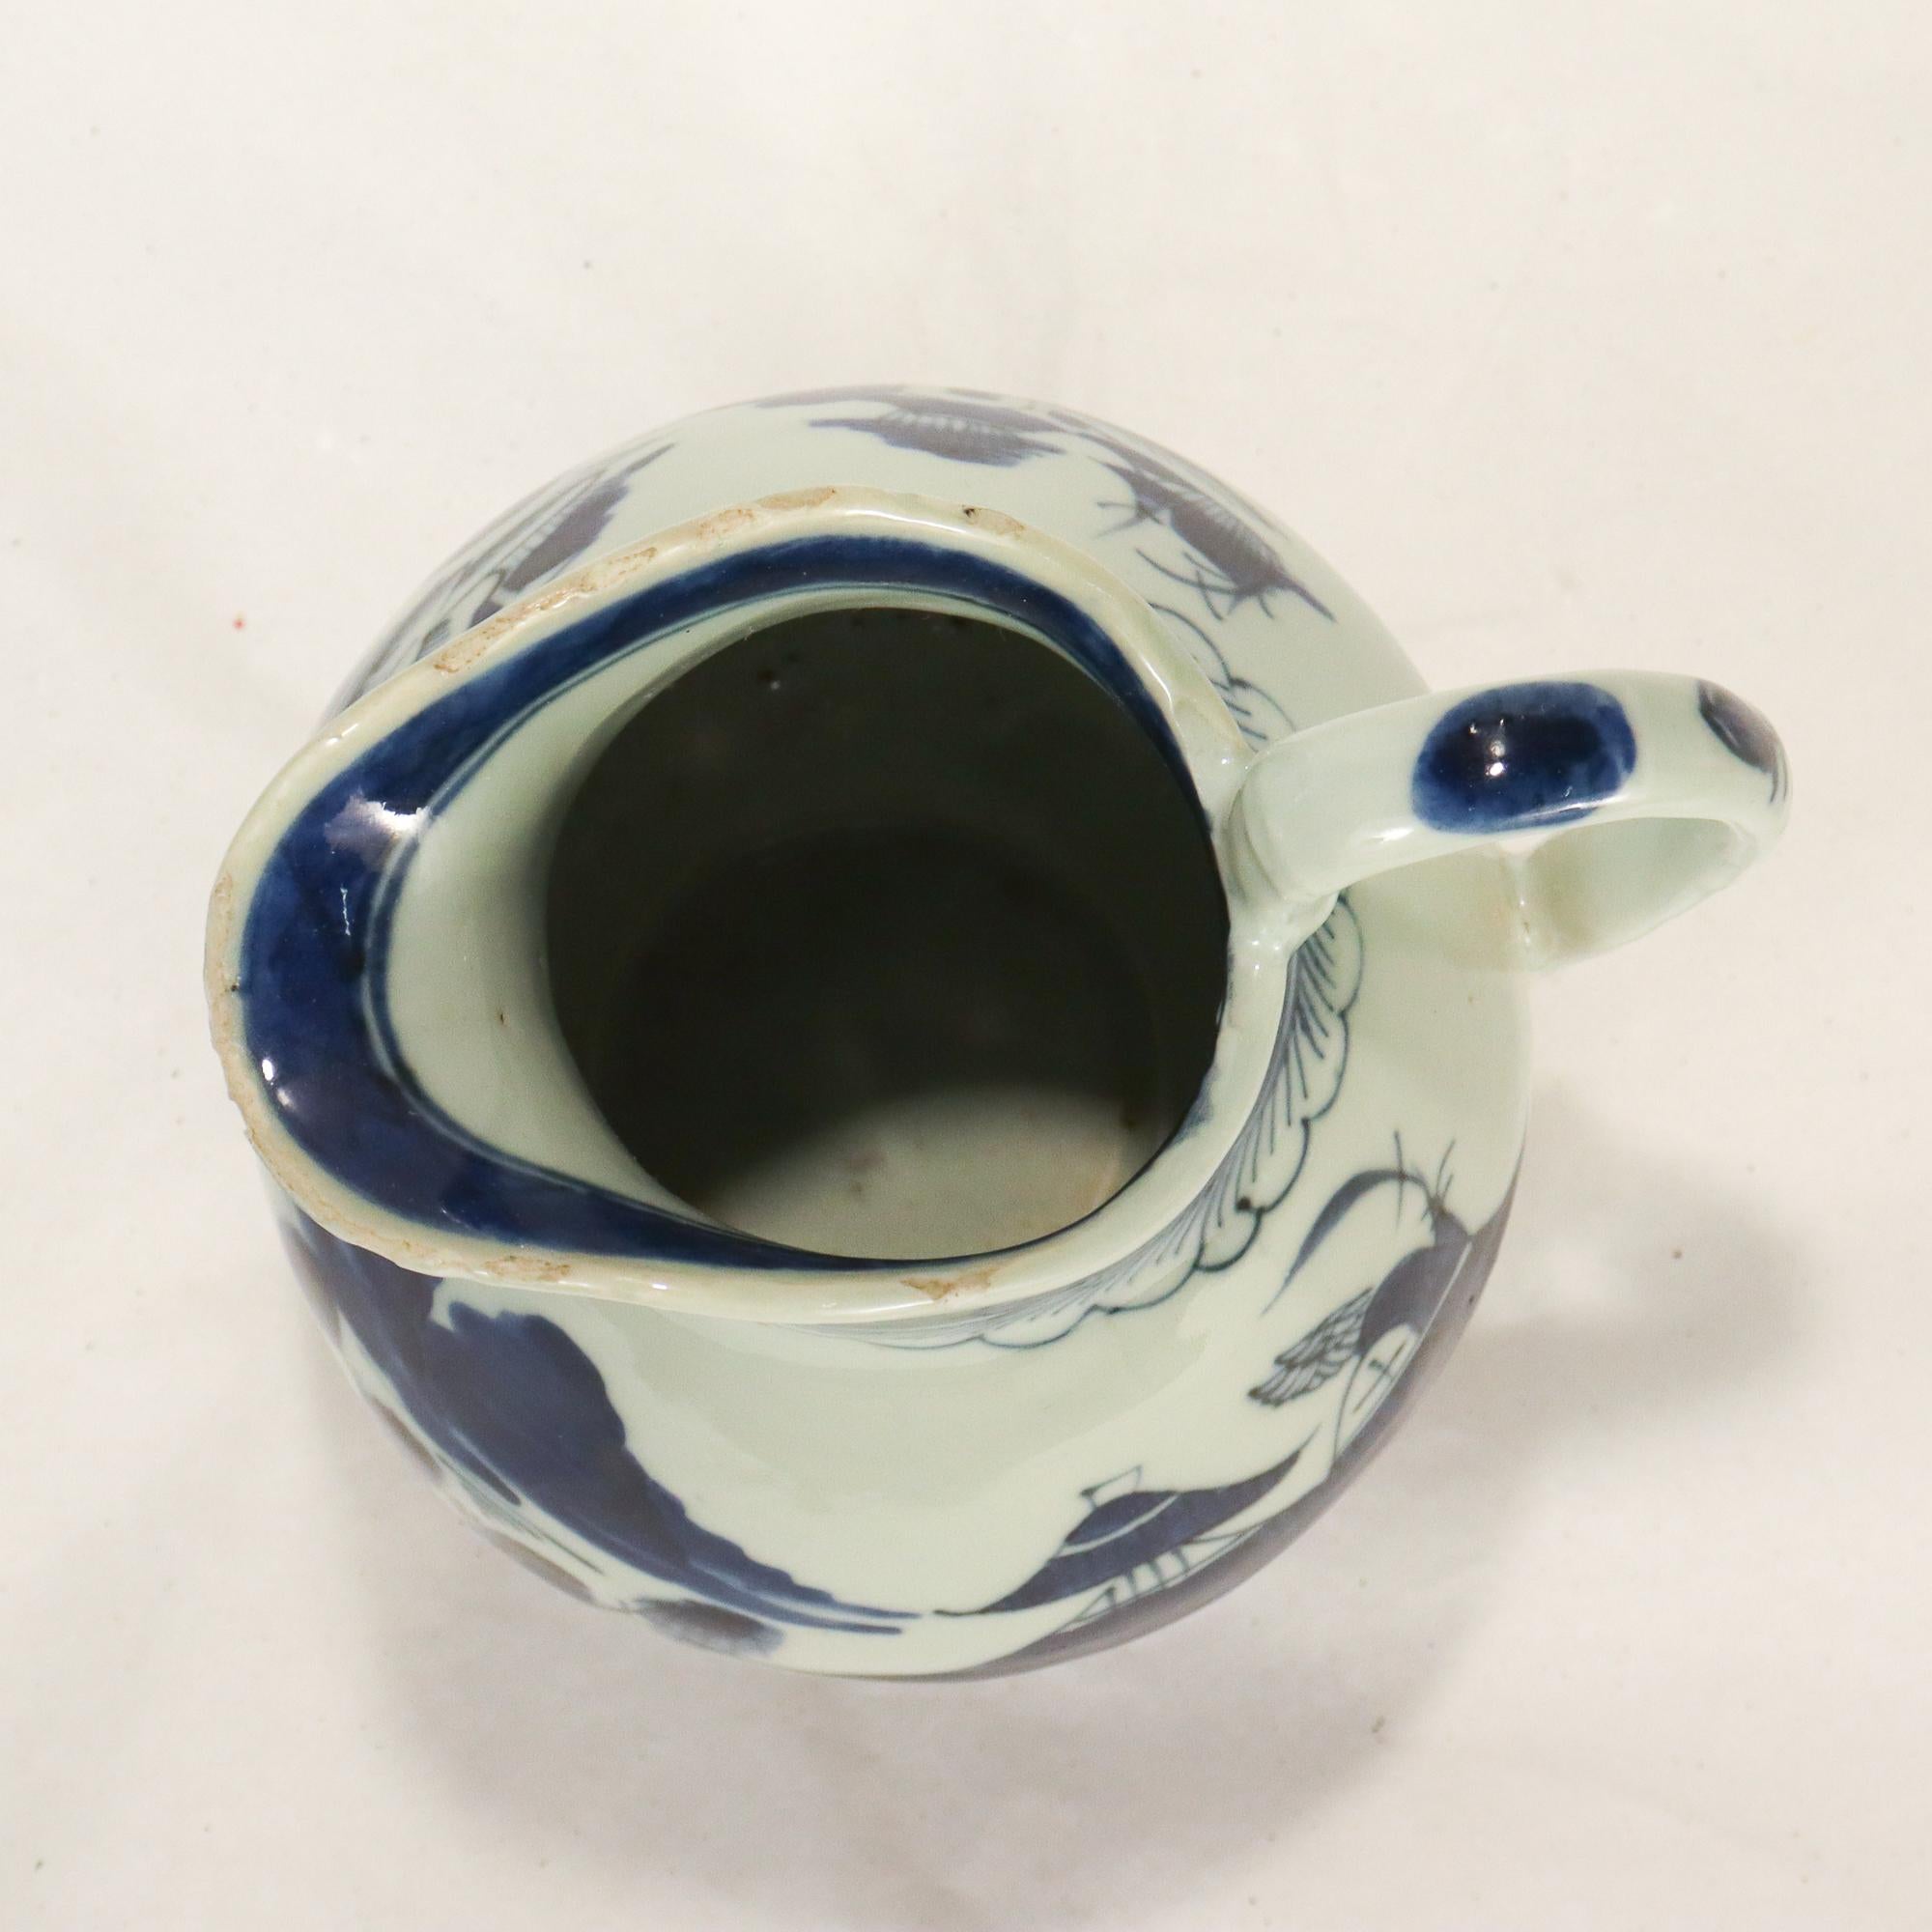 Antique Blue & White Canton Chinese Export Porcelain Pitcher or Jug 4